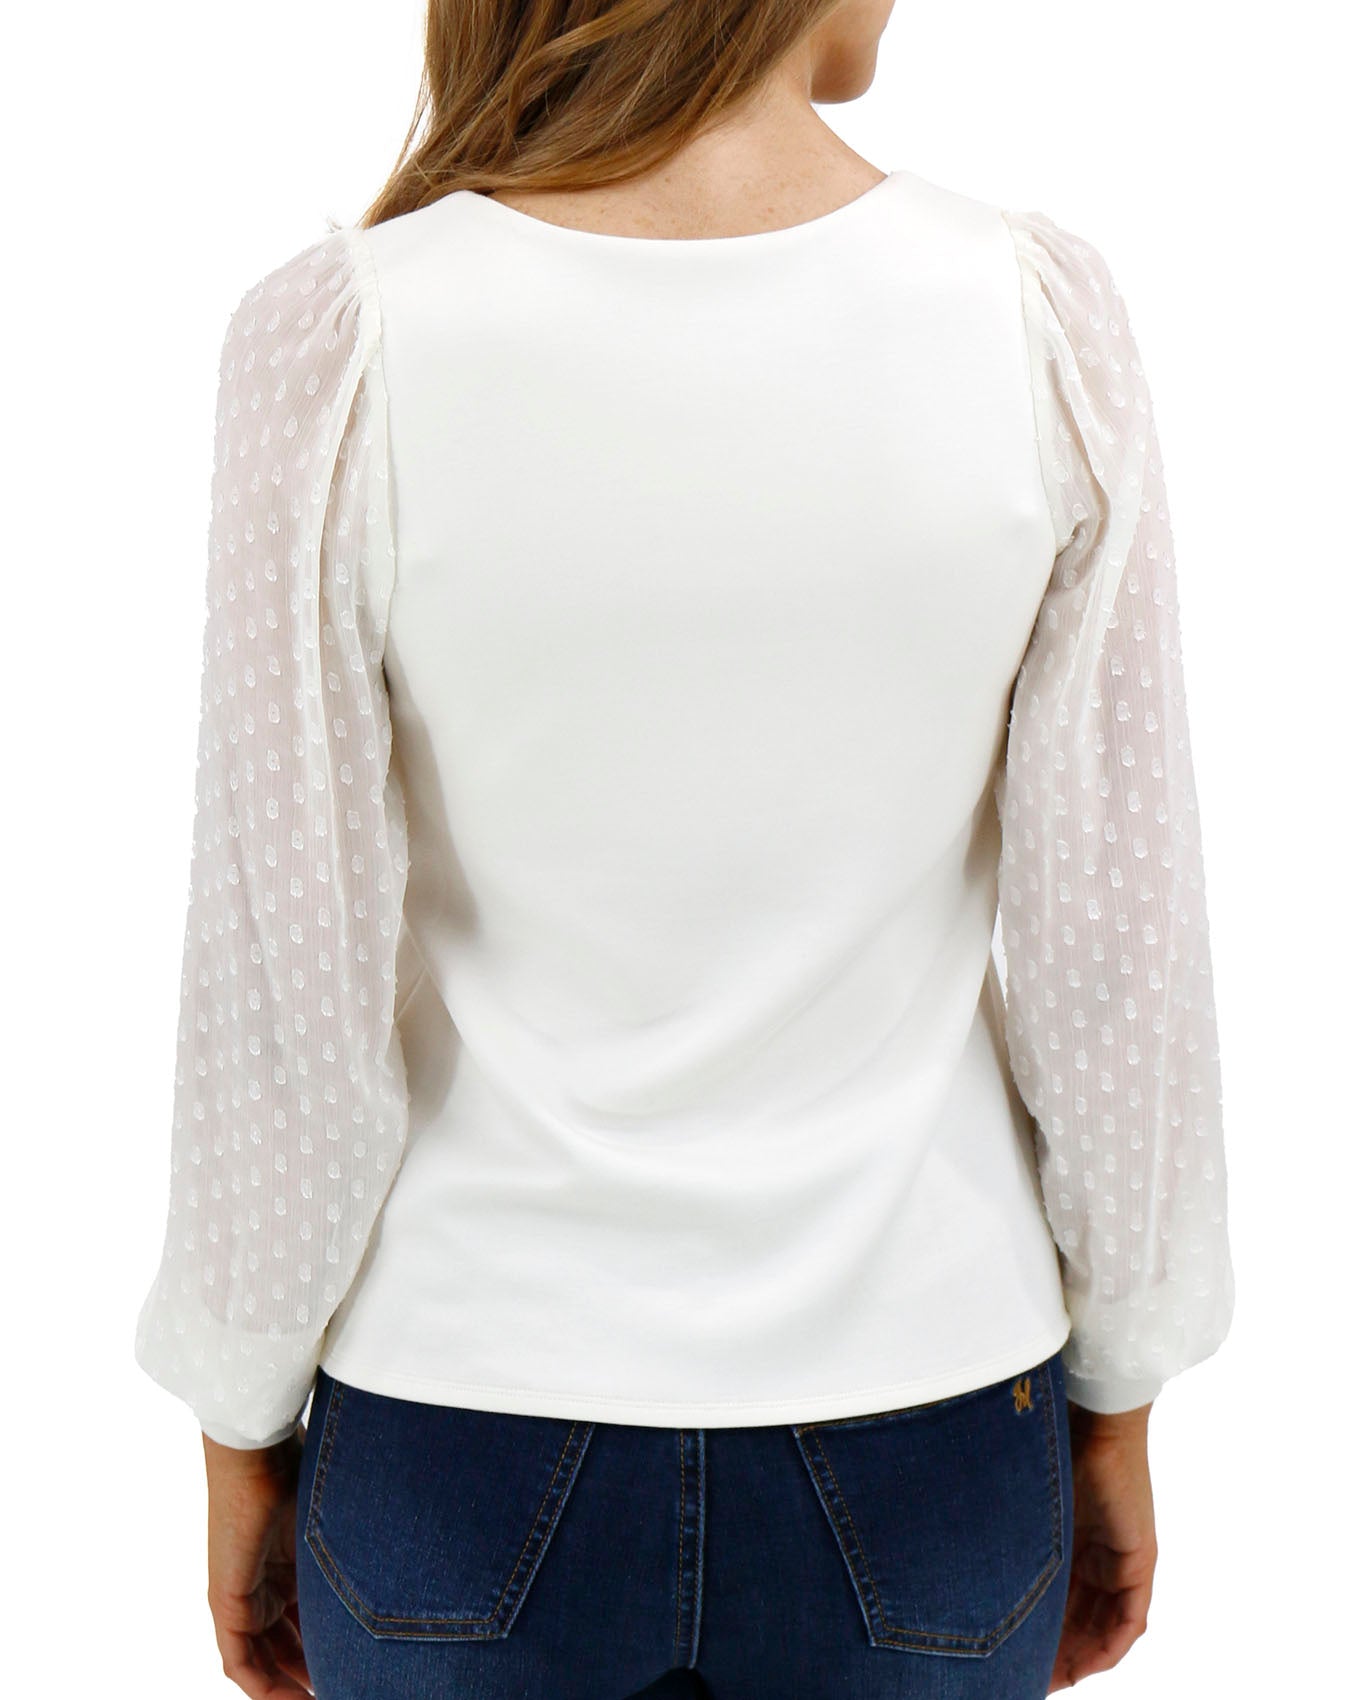 Luxe Knit Ivory Square Neck Long Sleeve Top - Grace and Lace